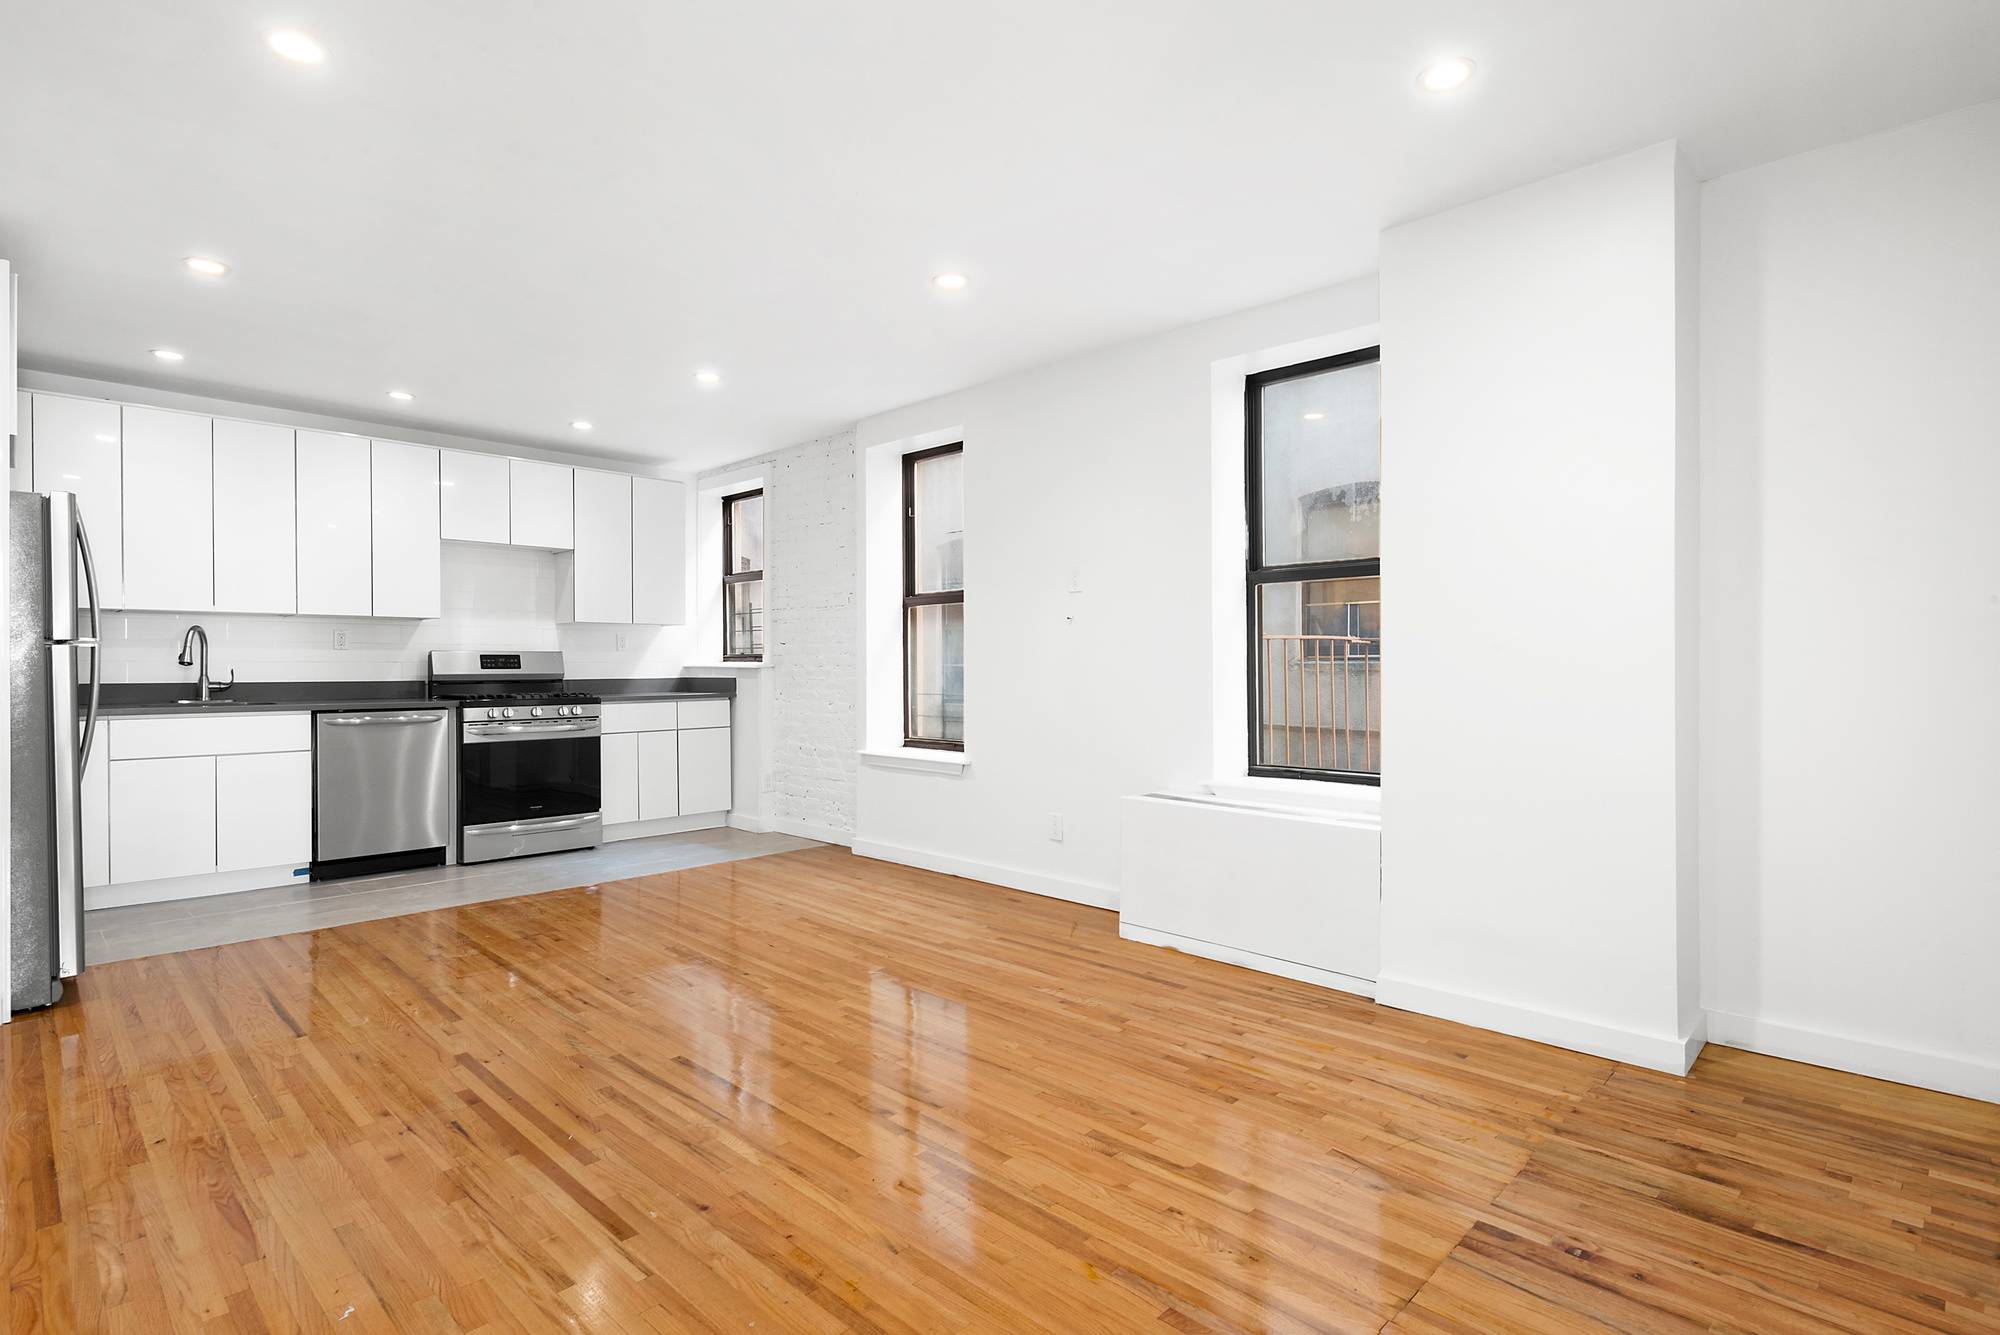 Welcome to 571 Academy Street an amazing Condo nestled in the heart of Inwood.